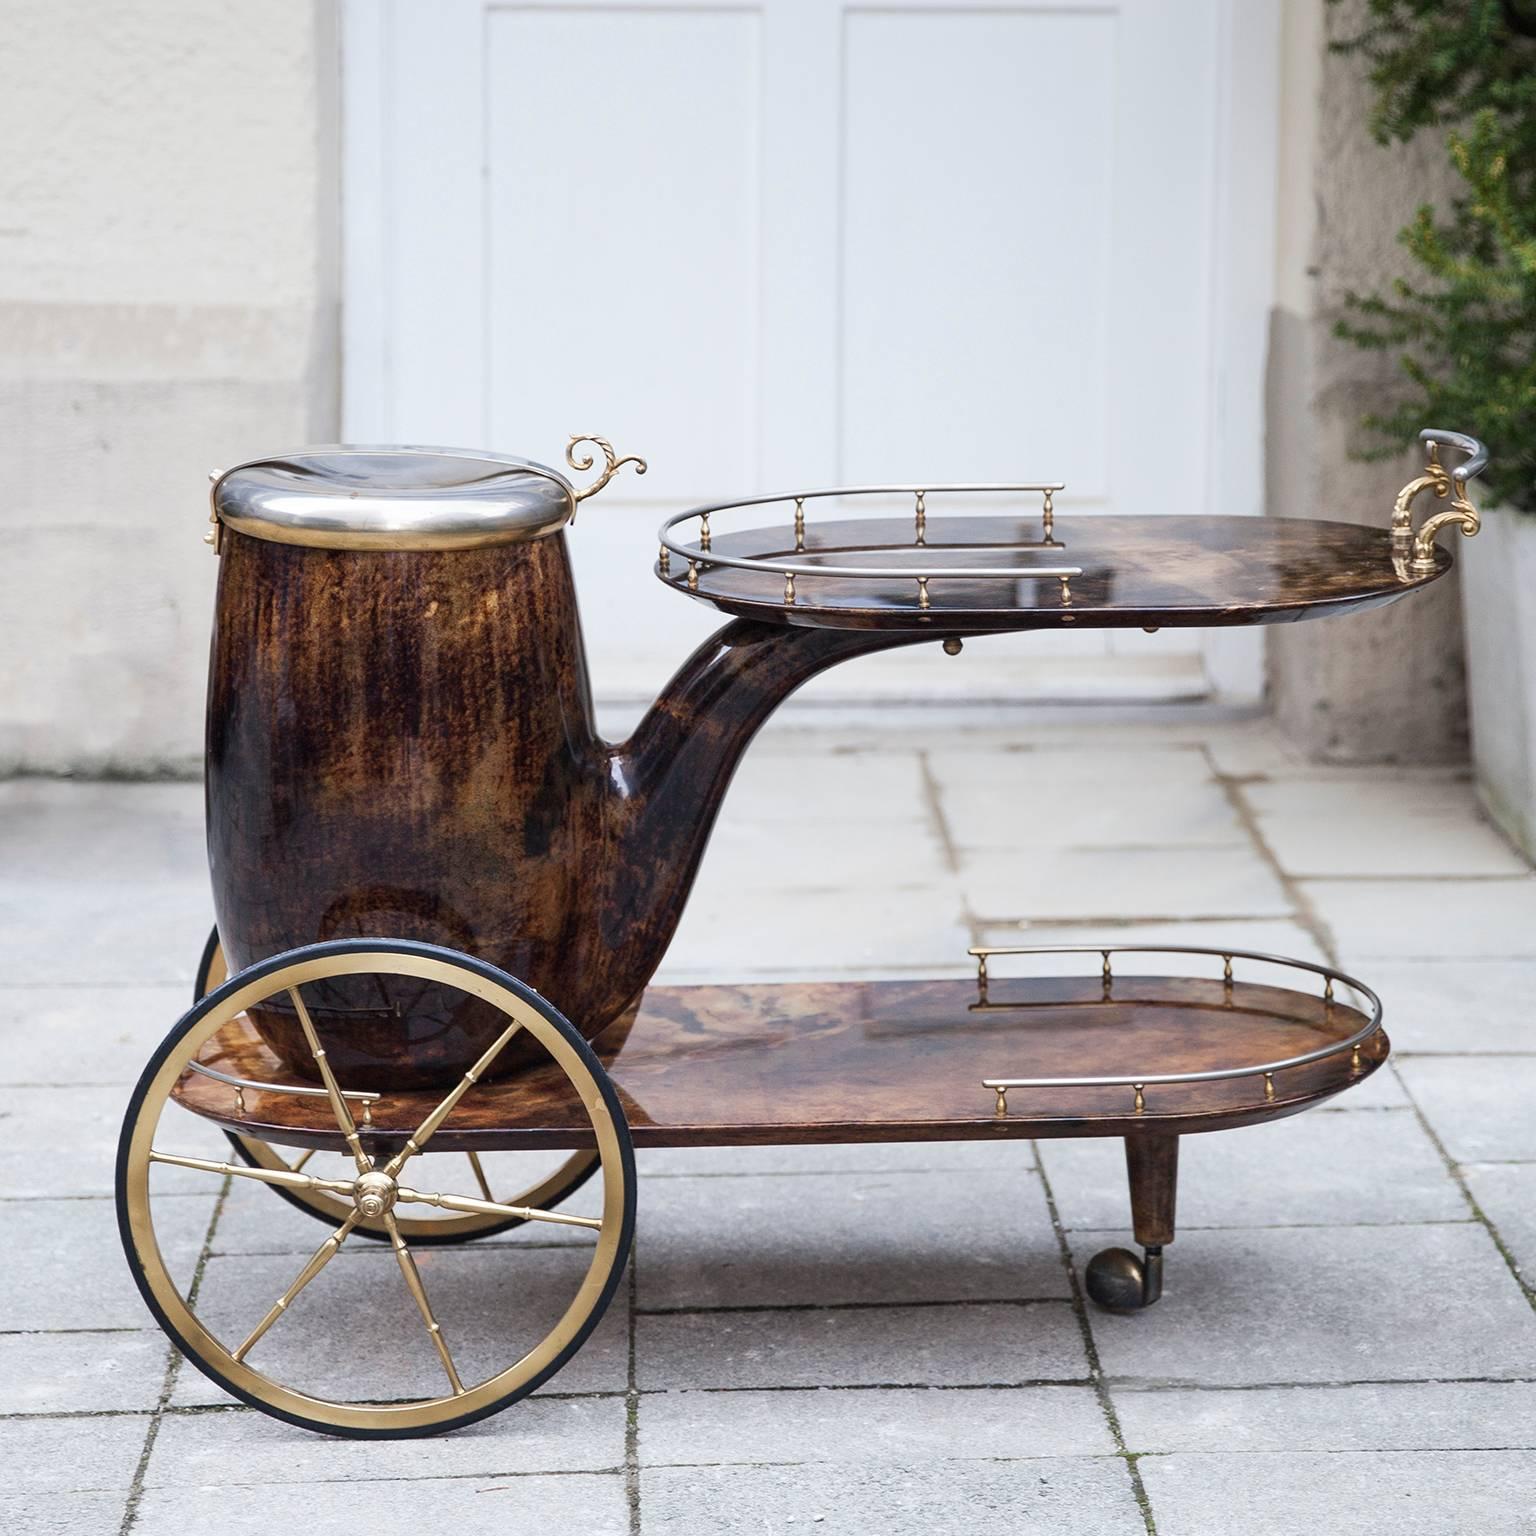 Aldo Tura bar cart in form of a pipe, lacquered in brown goatskin with brass applications and a huge container as champagne or wine cooler.
Excellent condition.